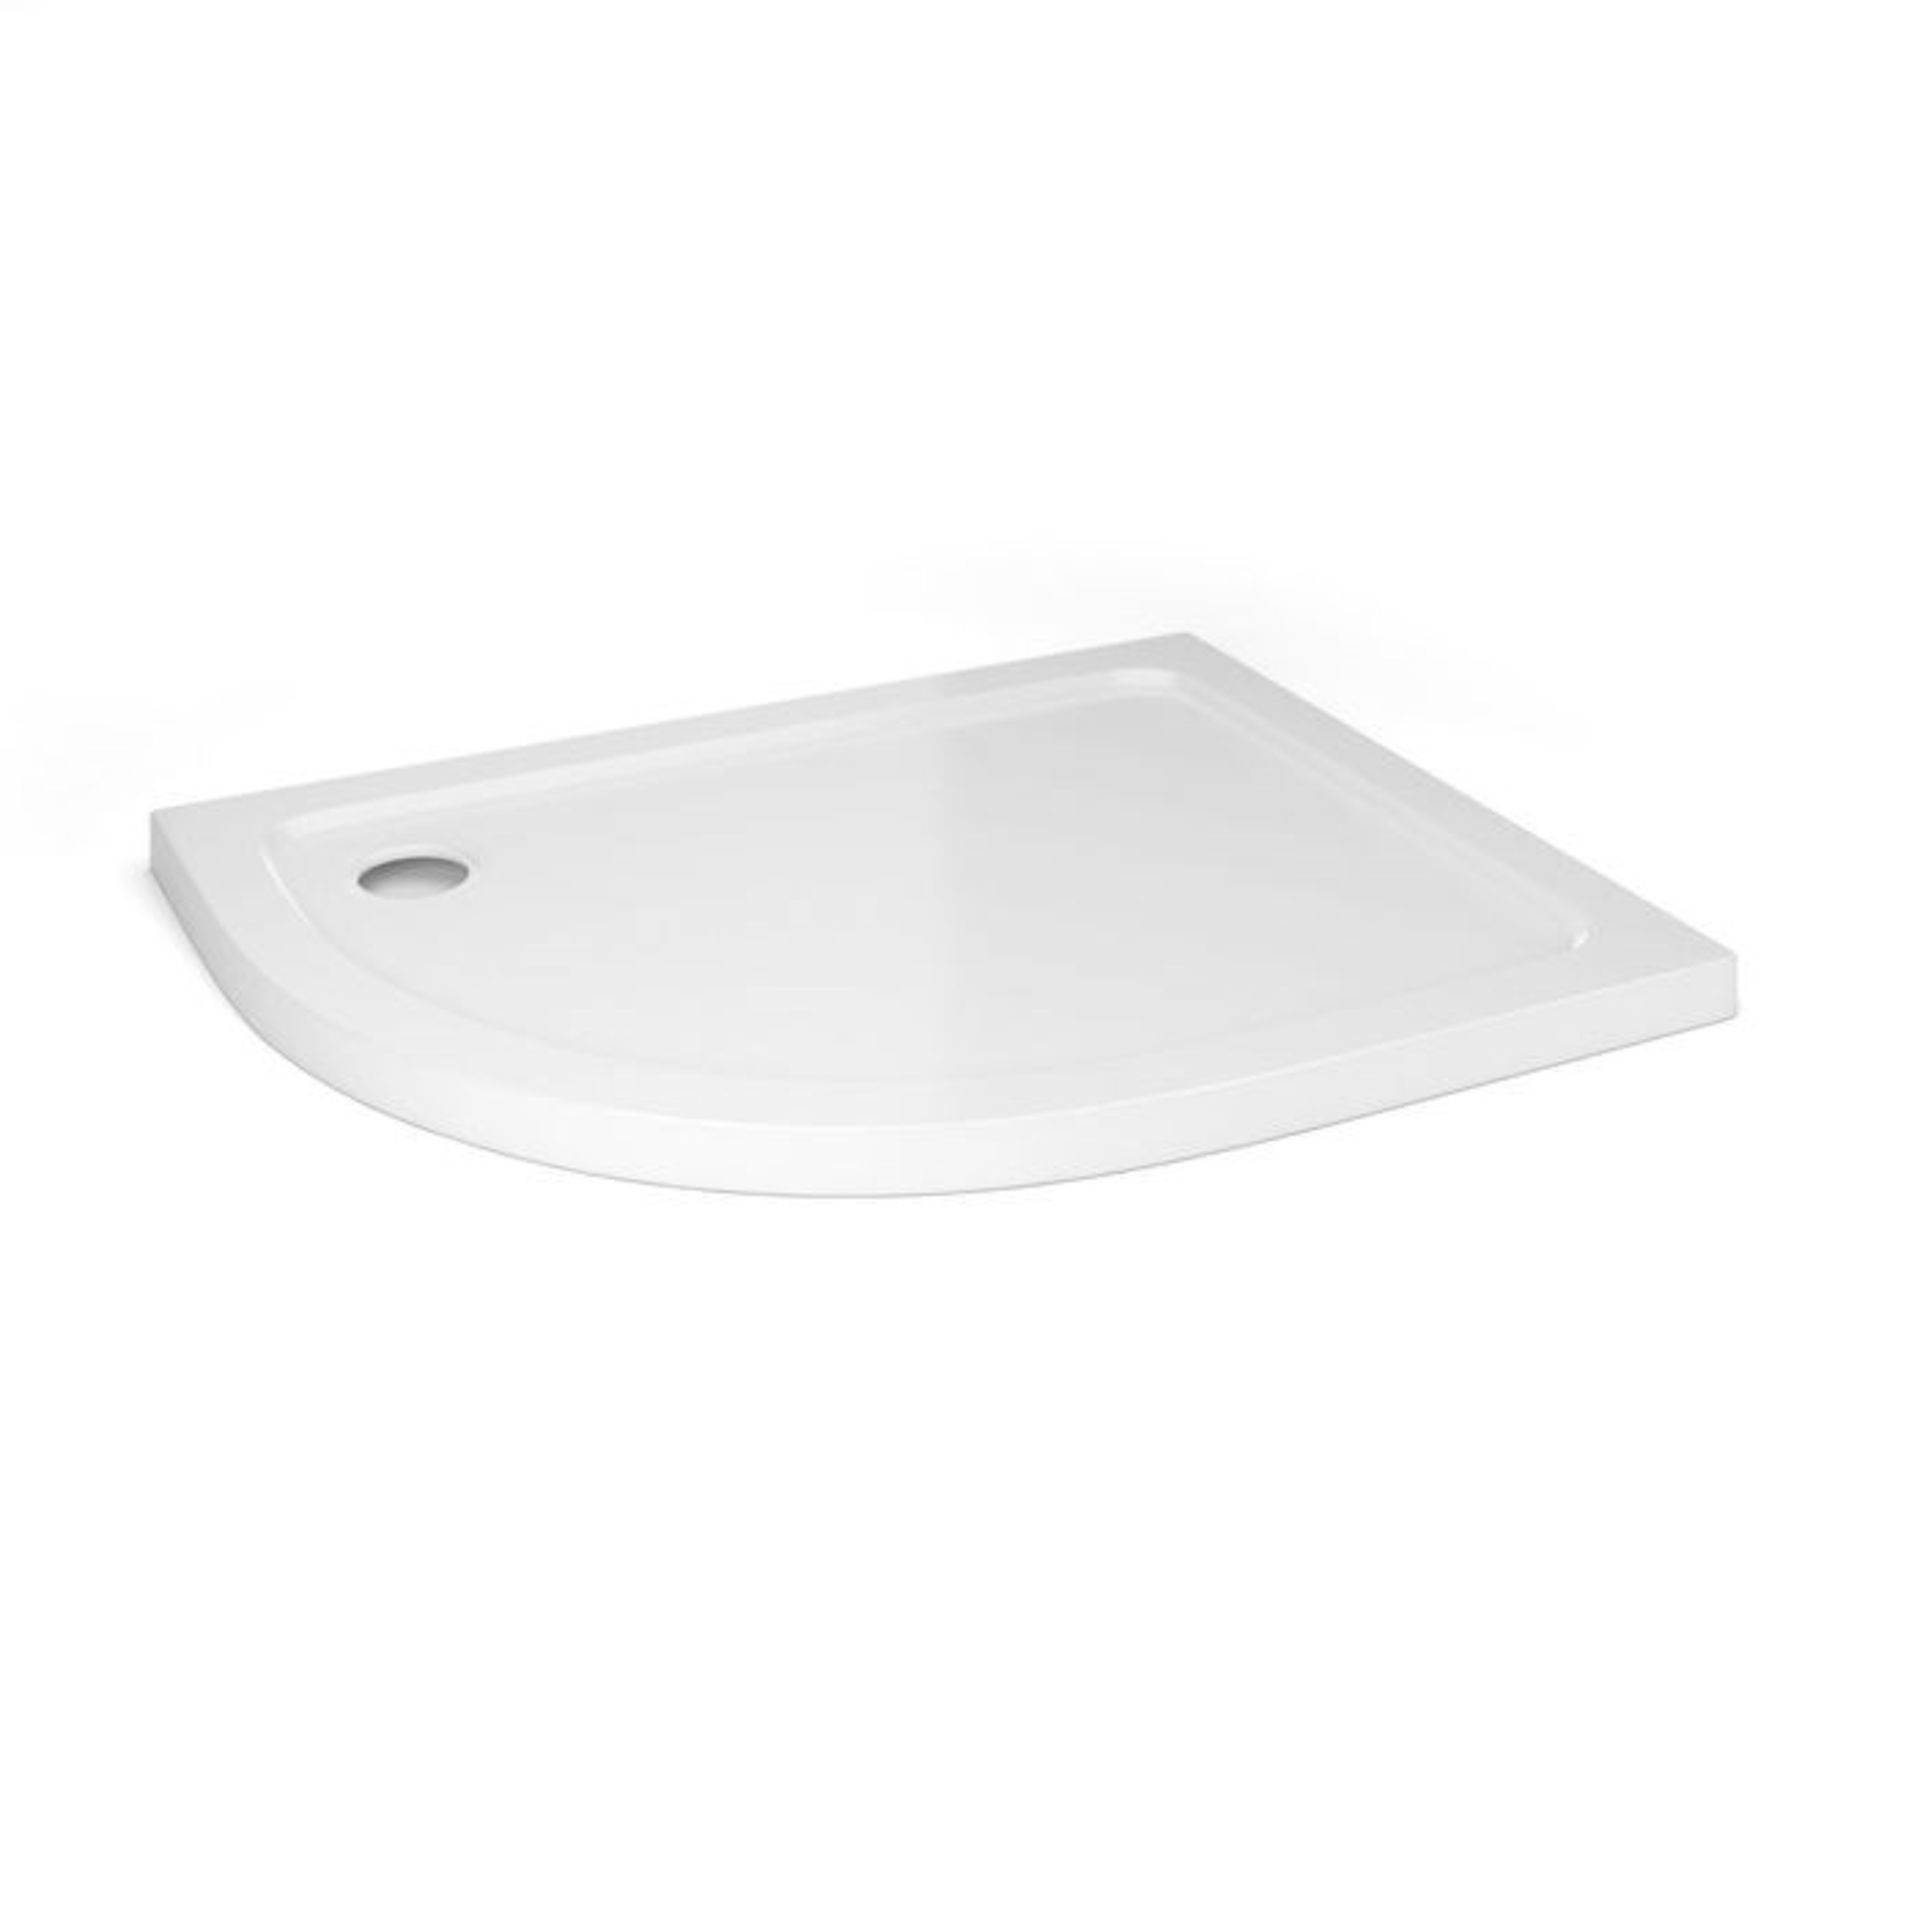 (DW24) 1000x800mm Offset Quadrant Ultra Slim Stone Shower Tray - Left.Constructed from acrylic ... - Image 2 of 2